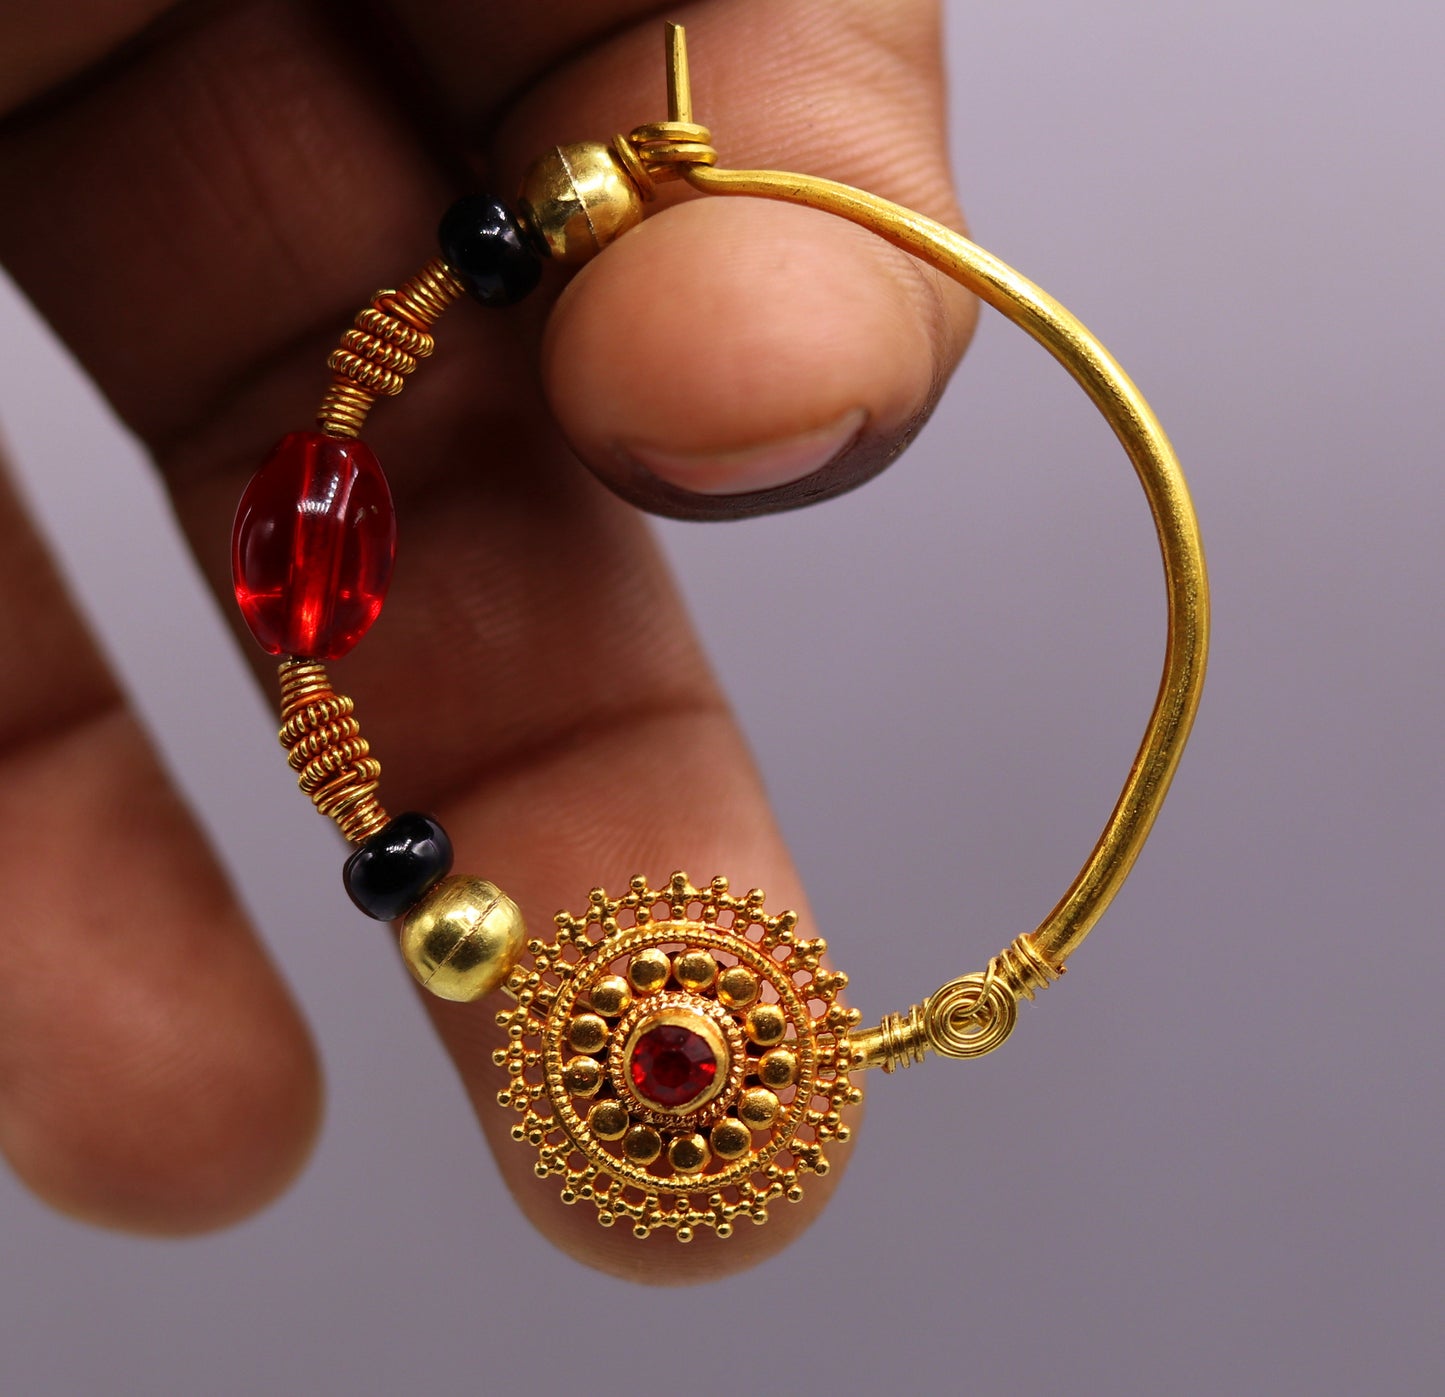 Vintage handmade 20kt yellow gold fabulous queen jodha nath nose ring indian tribal wedding jewelry for looking queen bridal jewelry - TRIBAL ORNAMENTS